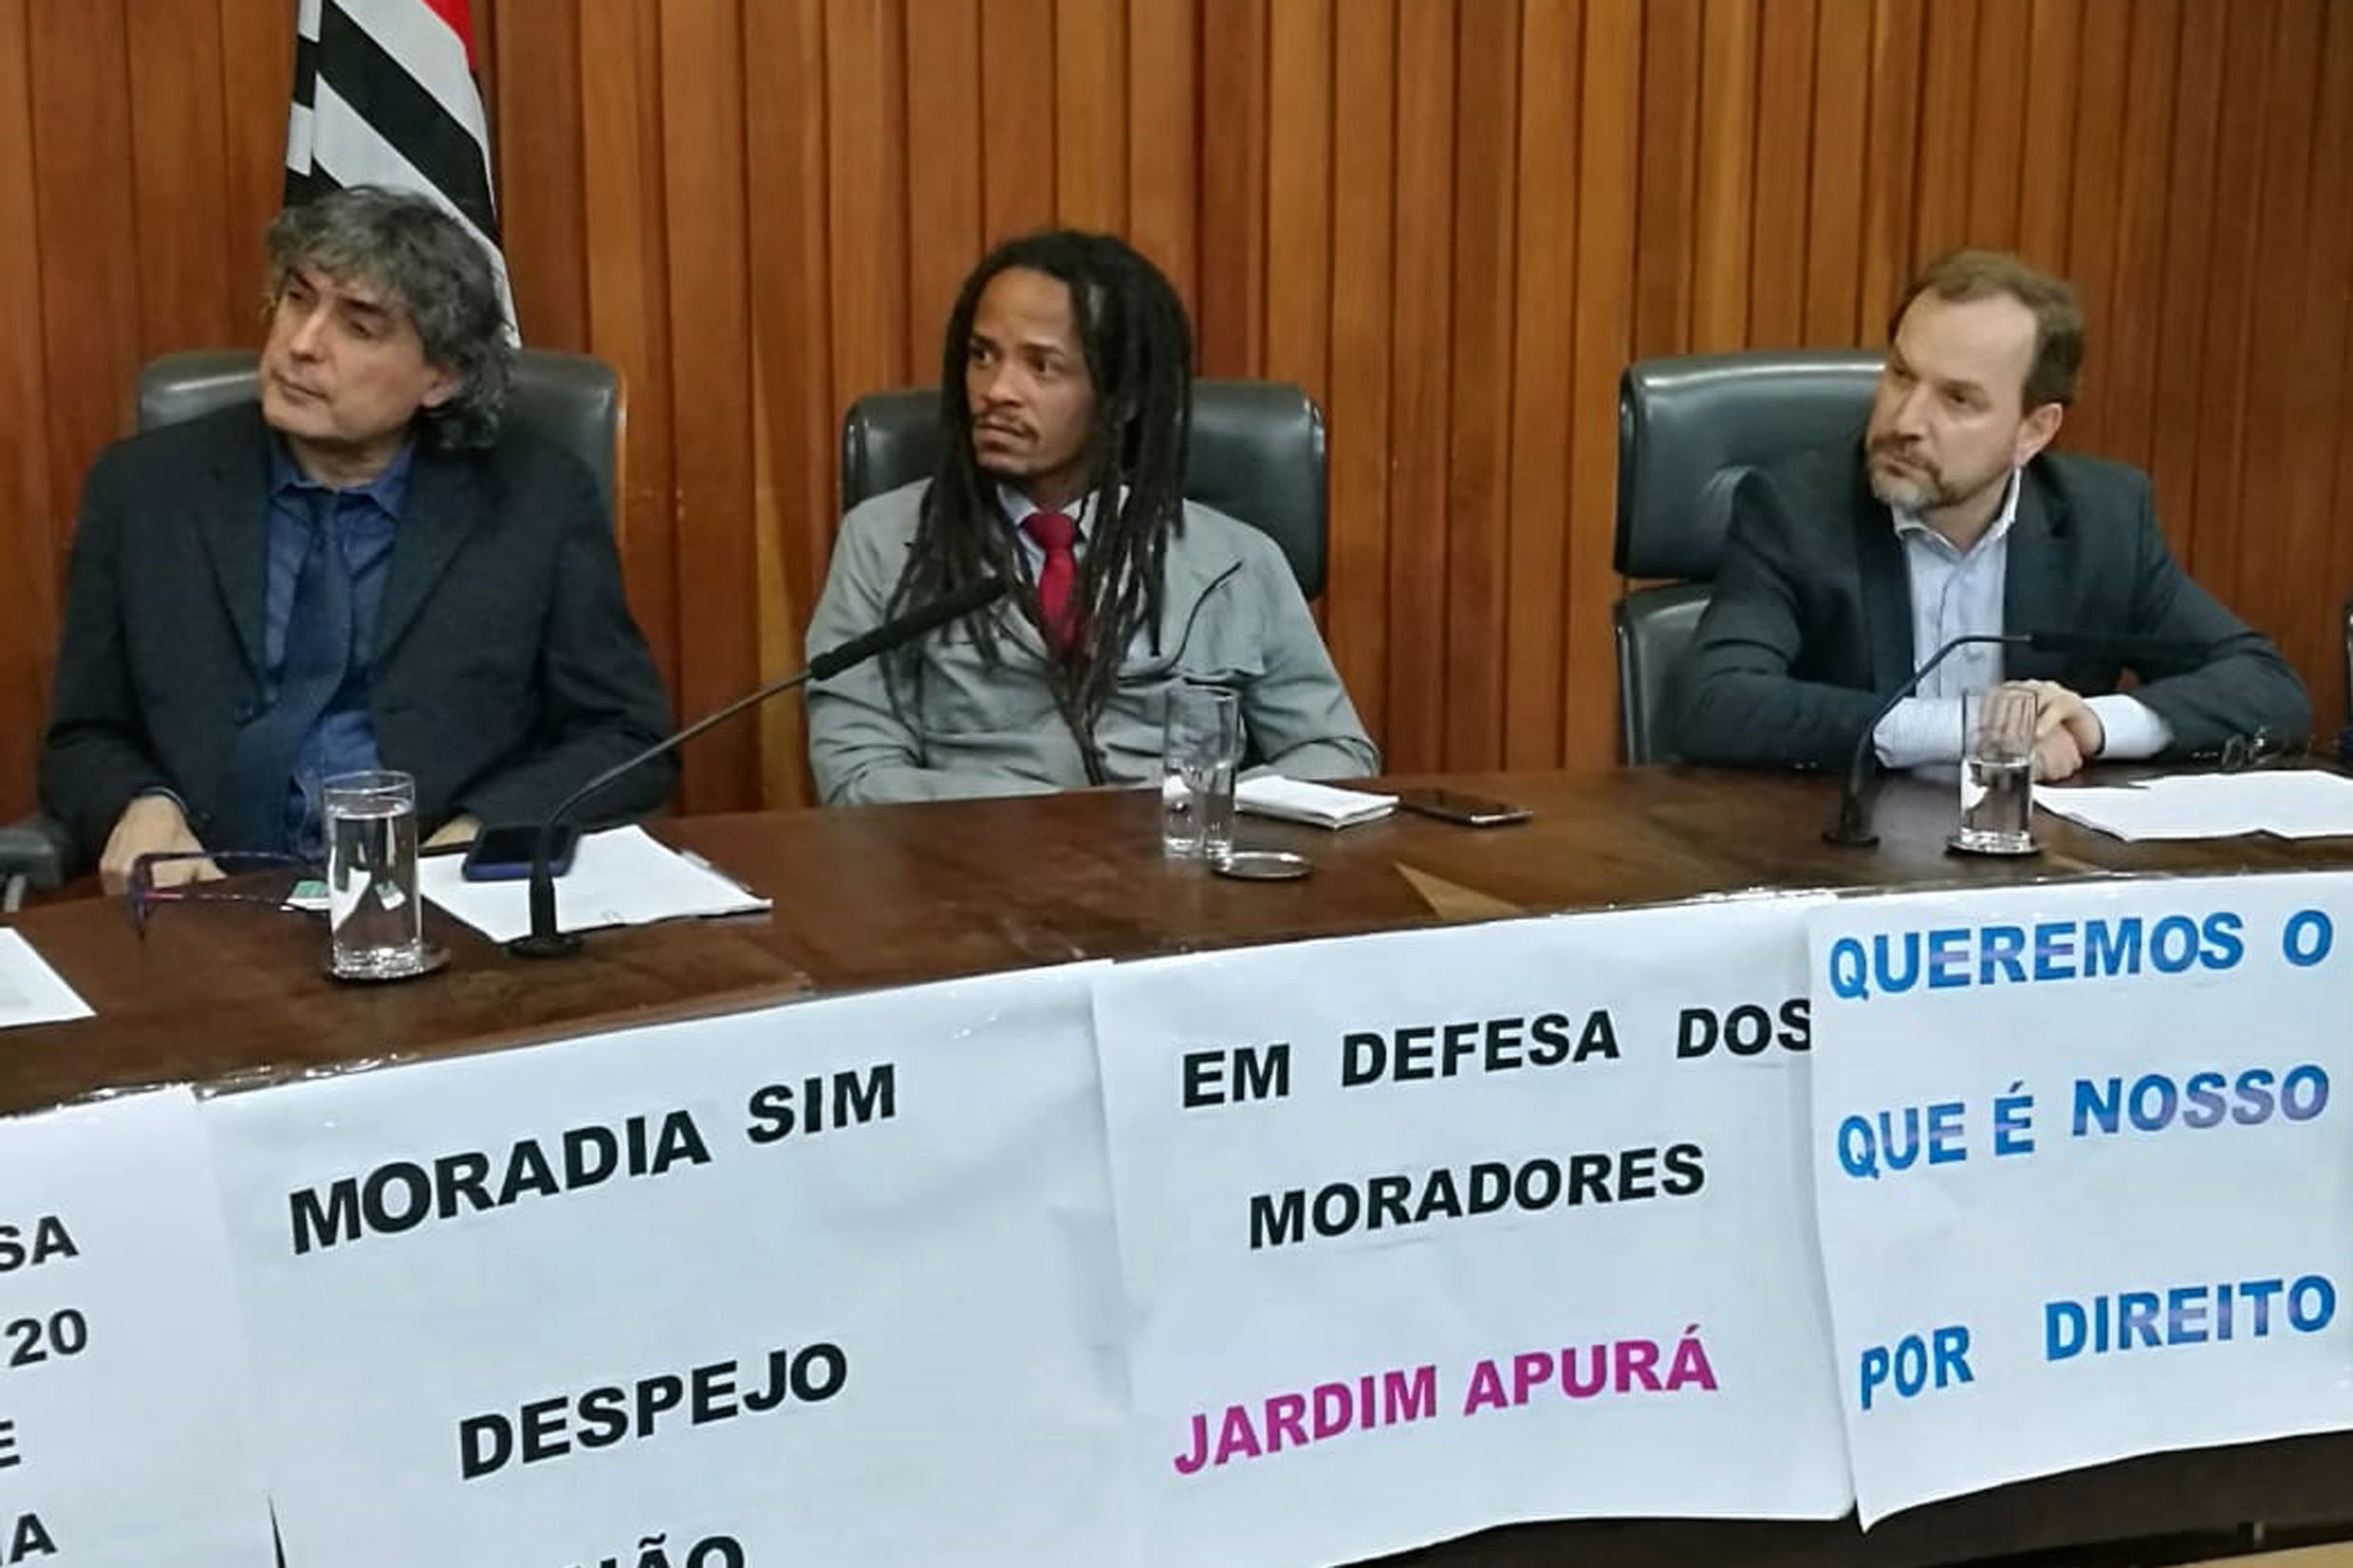 Carlos Giannazi, Wesley Rosa e Celso Giannazi<a style='float:right;color:#ccc' href='https://www3.al.sp.gov.br/repositorio/noticia/N-08-2019/fg238815.jpg' target=_blank><i class='bi bi-zoom-in'></i> Clique para ver a imagem </a>